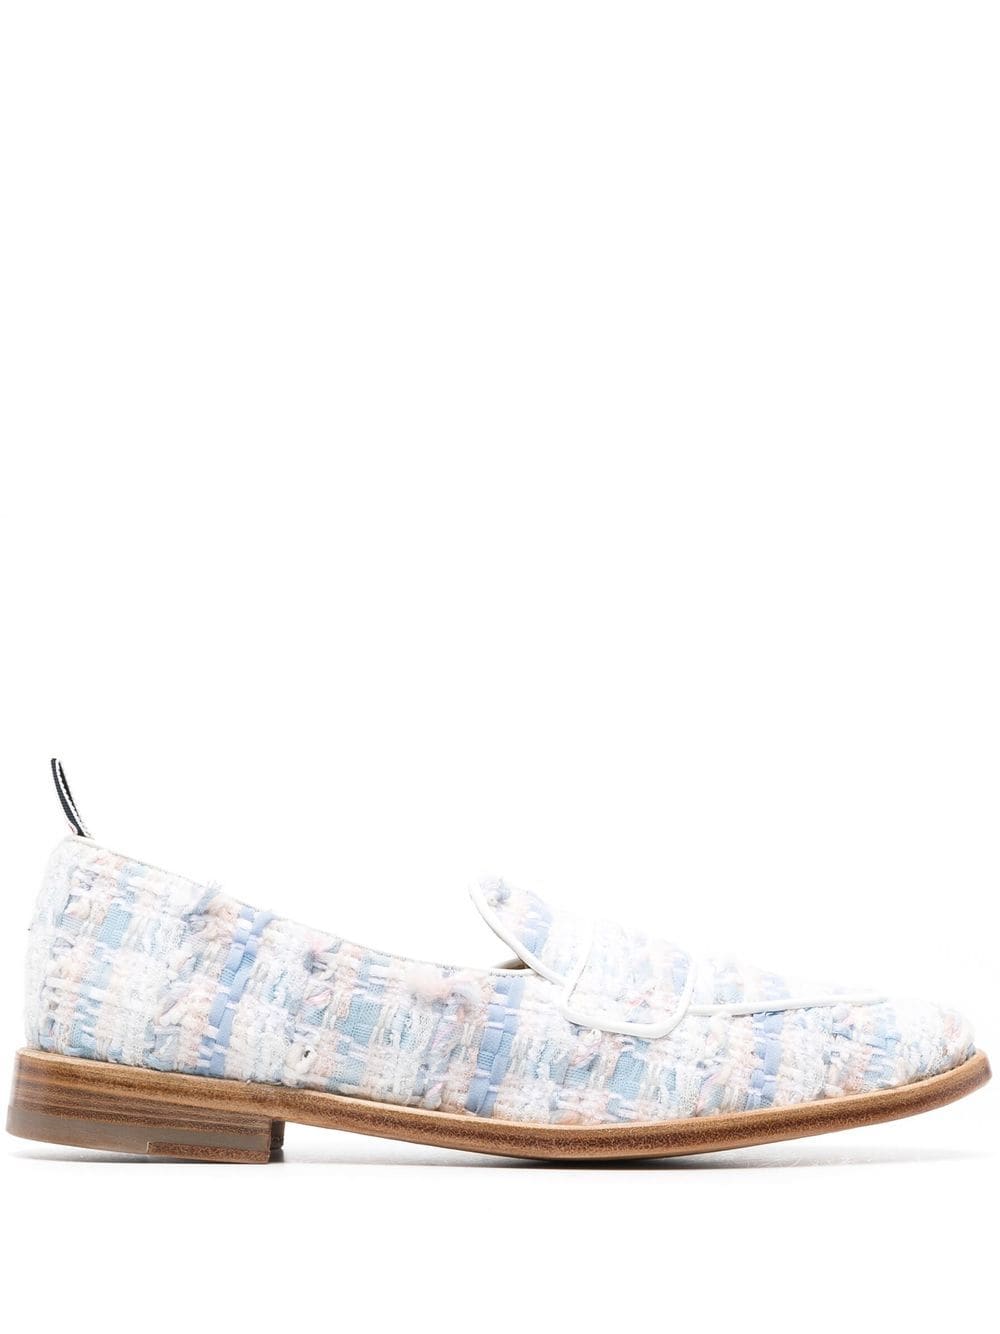 Thom Browne Penny Checked Loafers In Blue